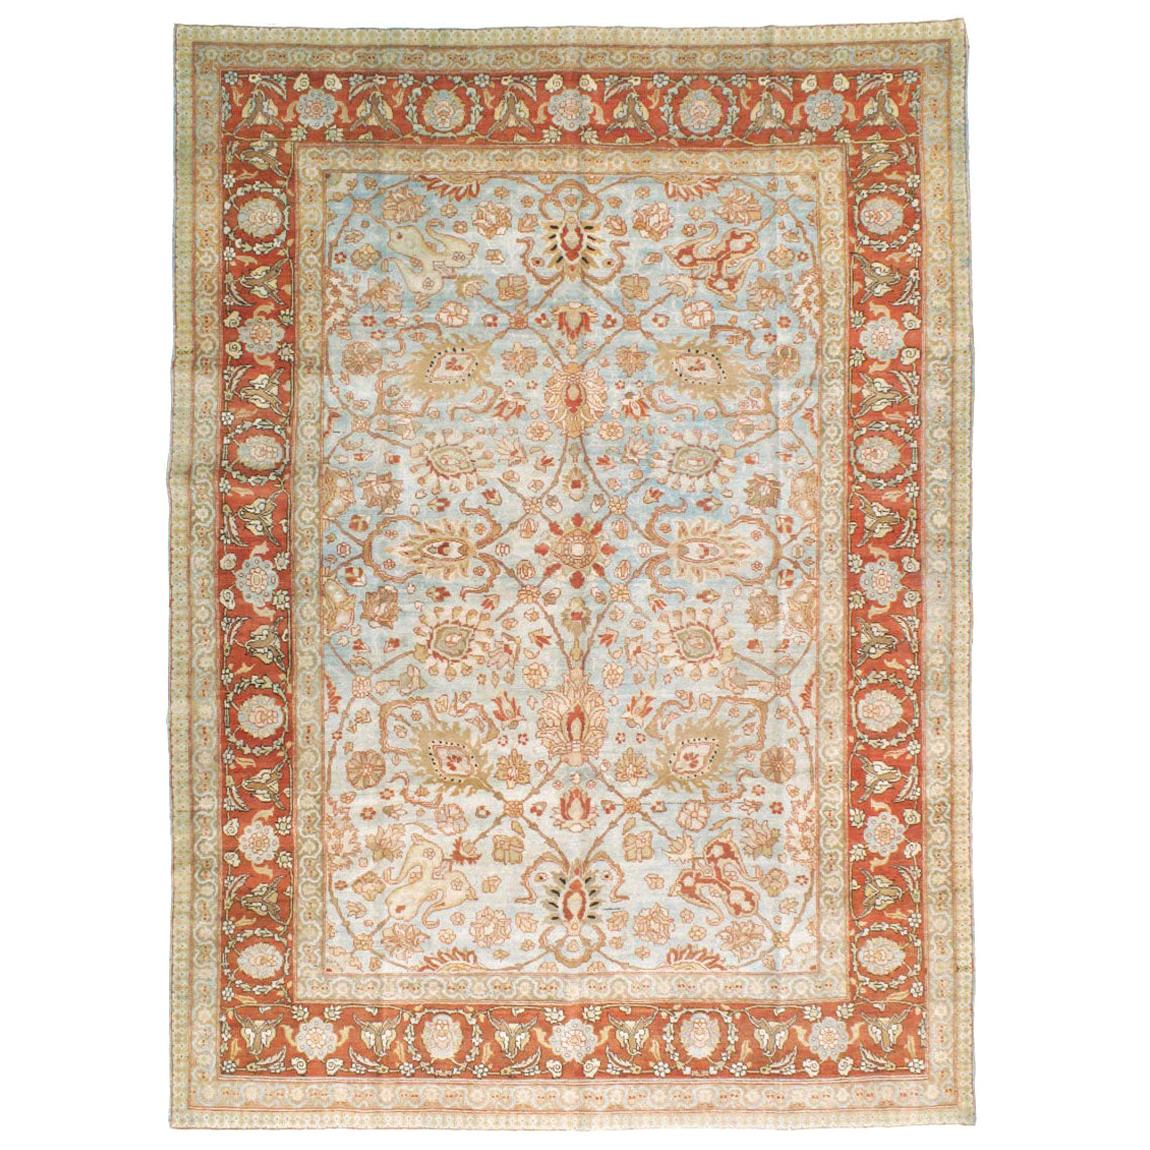 Early 20th Century Persian Tabriz Room Size Carpet in Red, Blue, and Grey For Sale